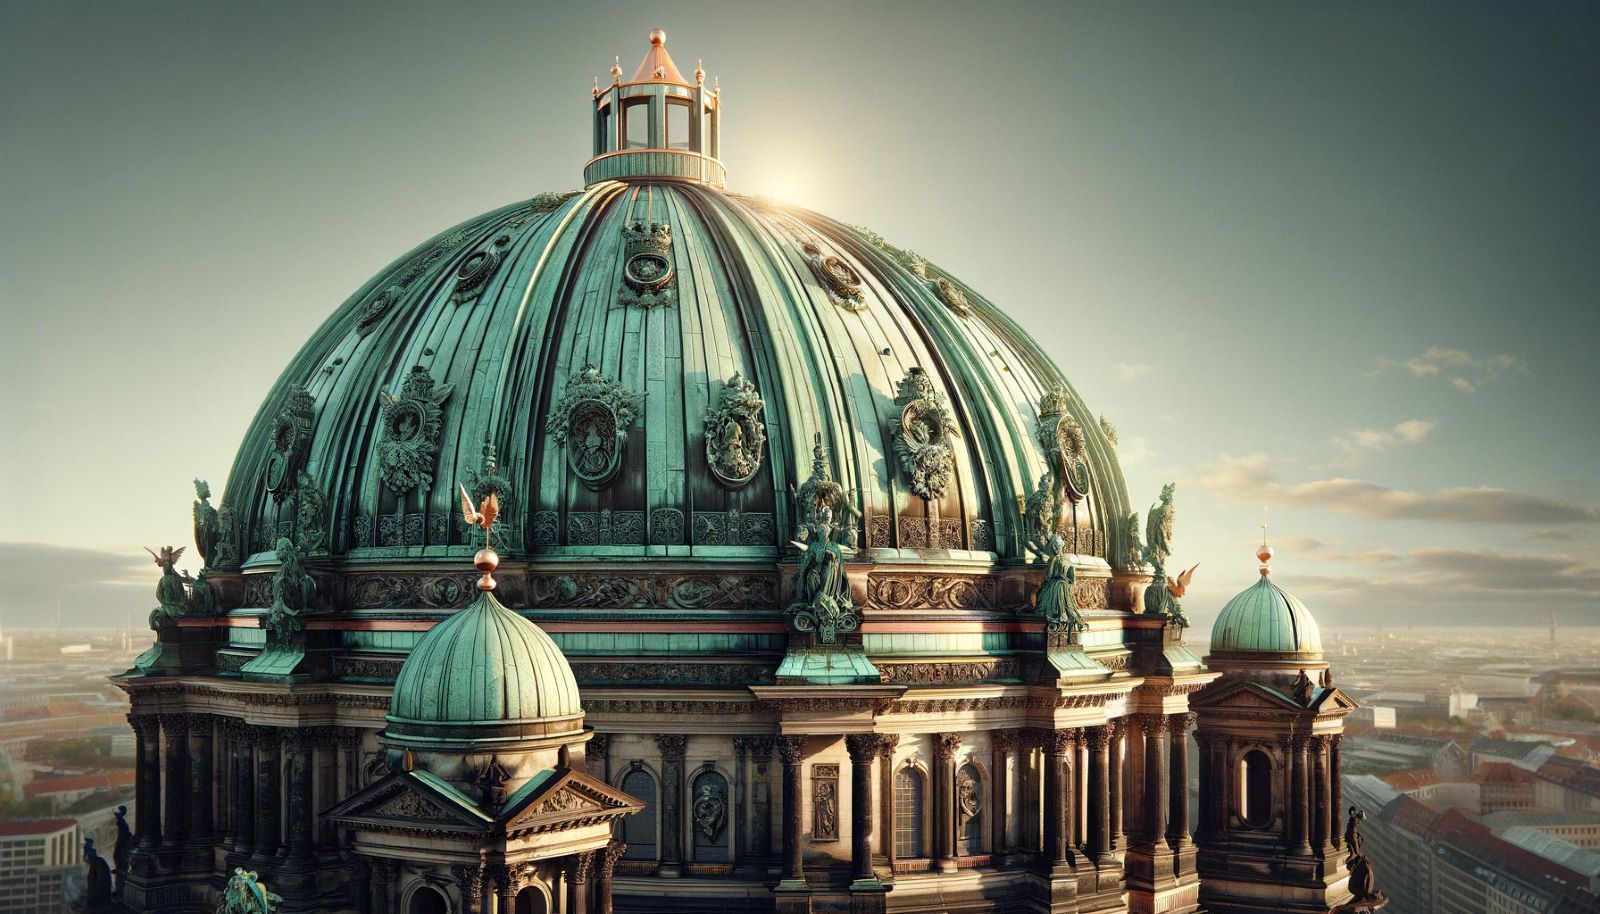 What Is The Berlin Cathedral Dome Made Of